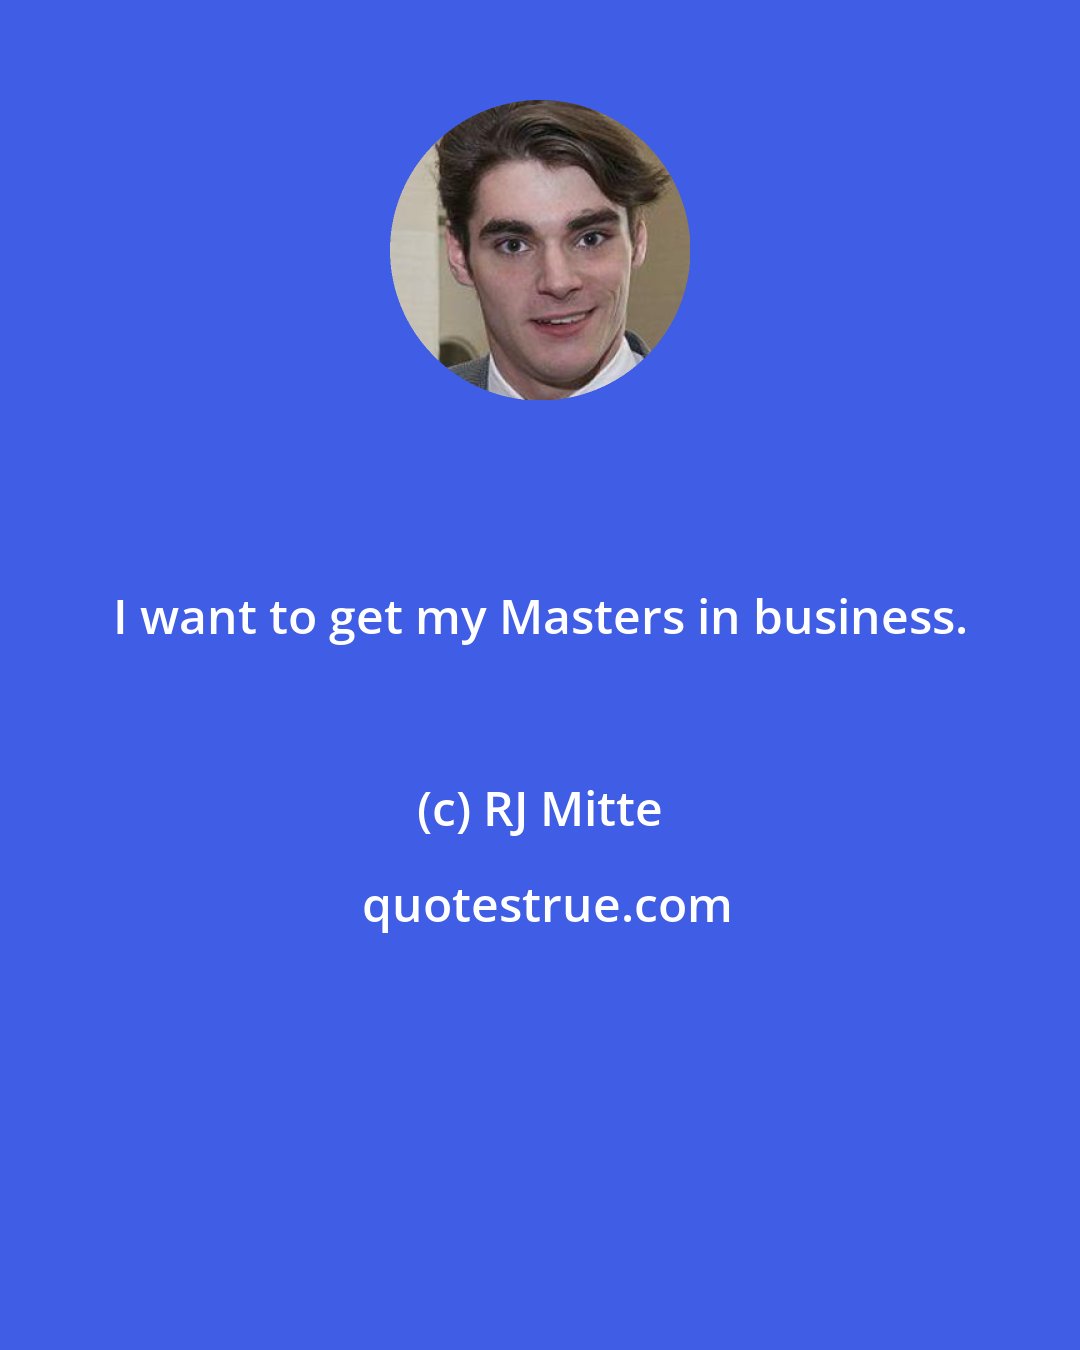 RJ Mitte: I want to get my Masters in business.